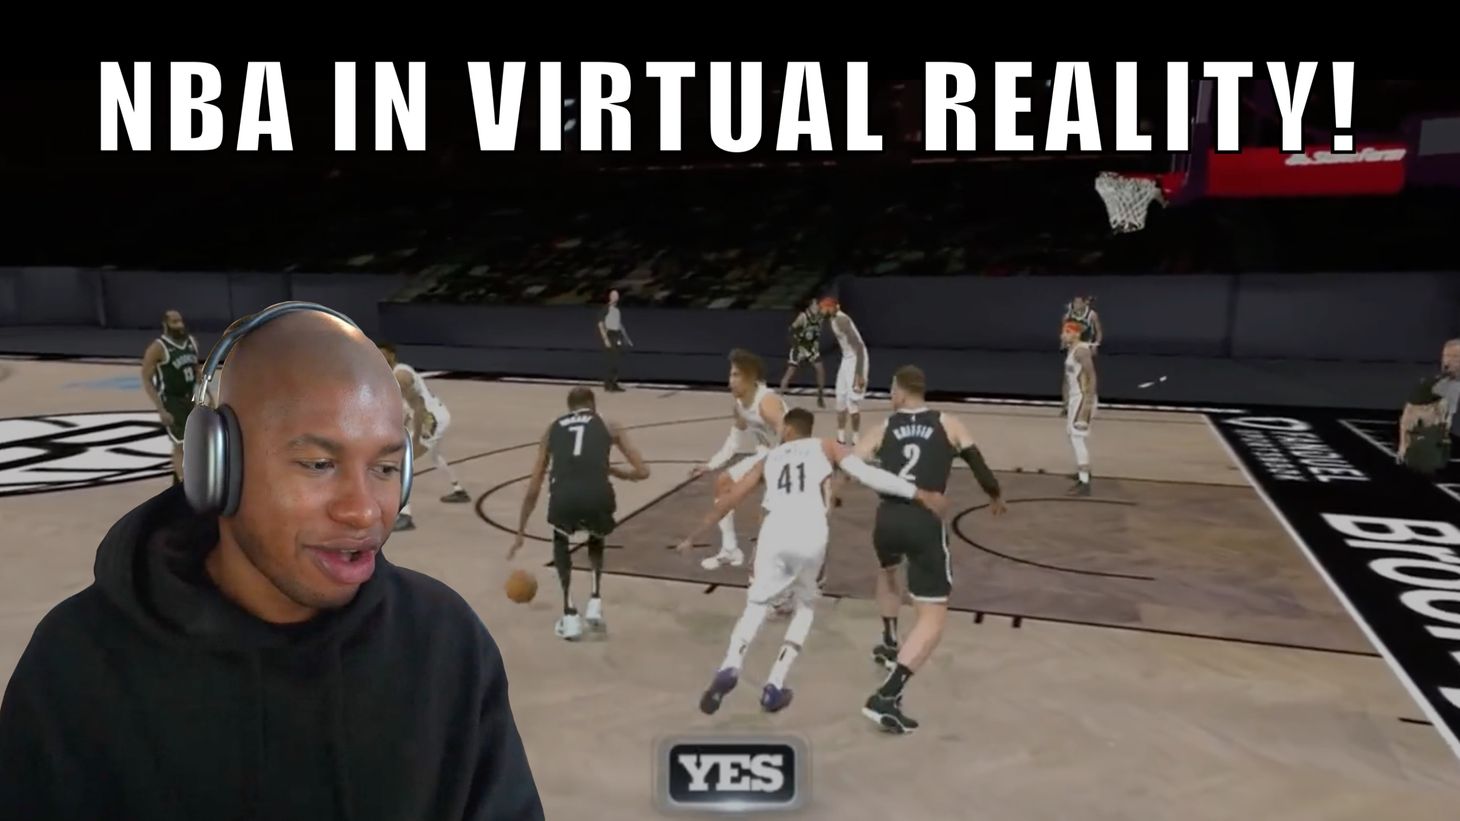 The Brooklyn Netaverse is Like a Live Version of NBA 2k in Virtual Reality